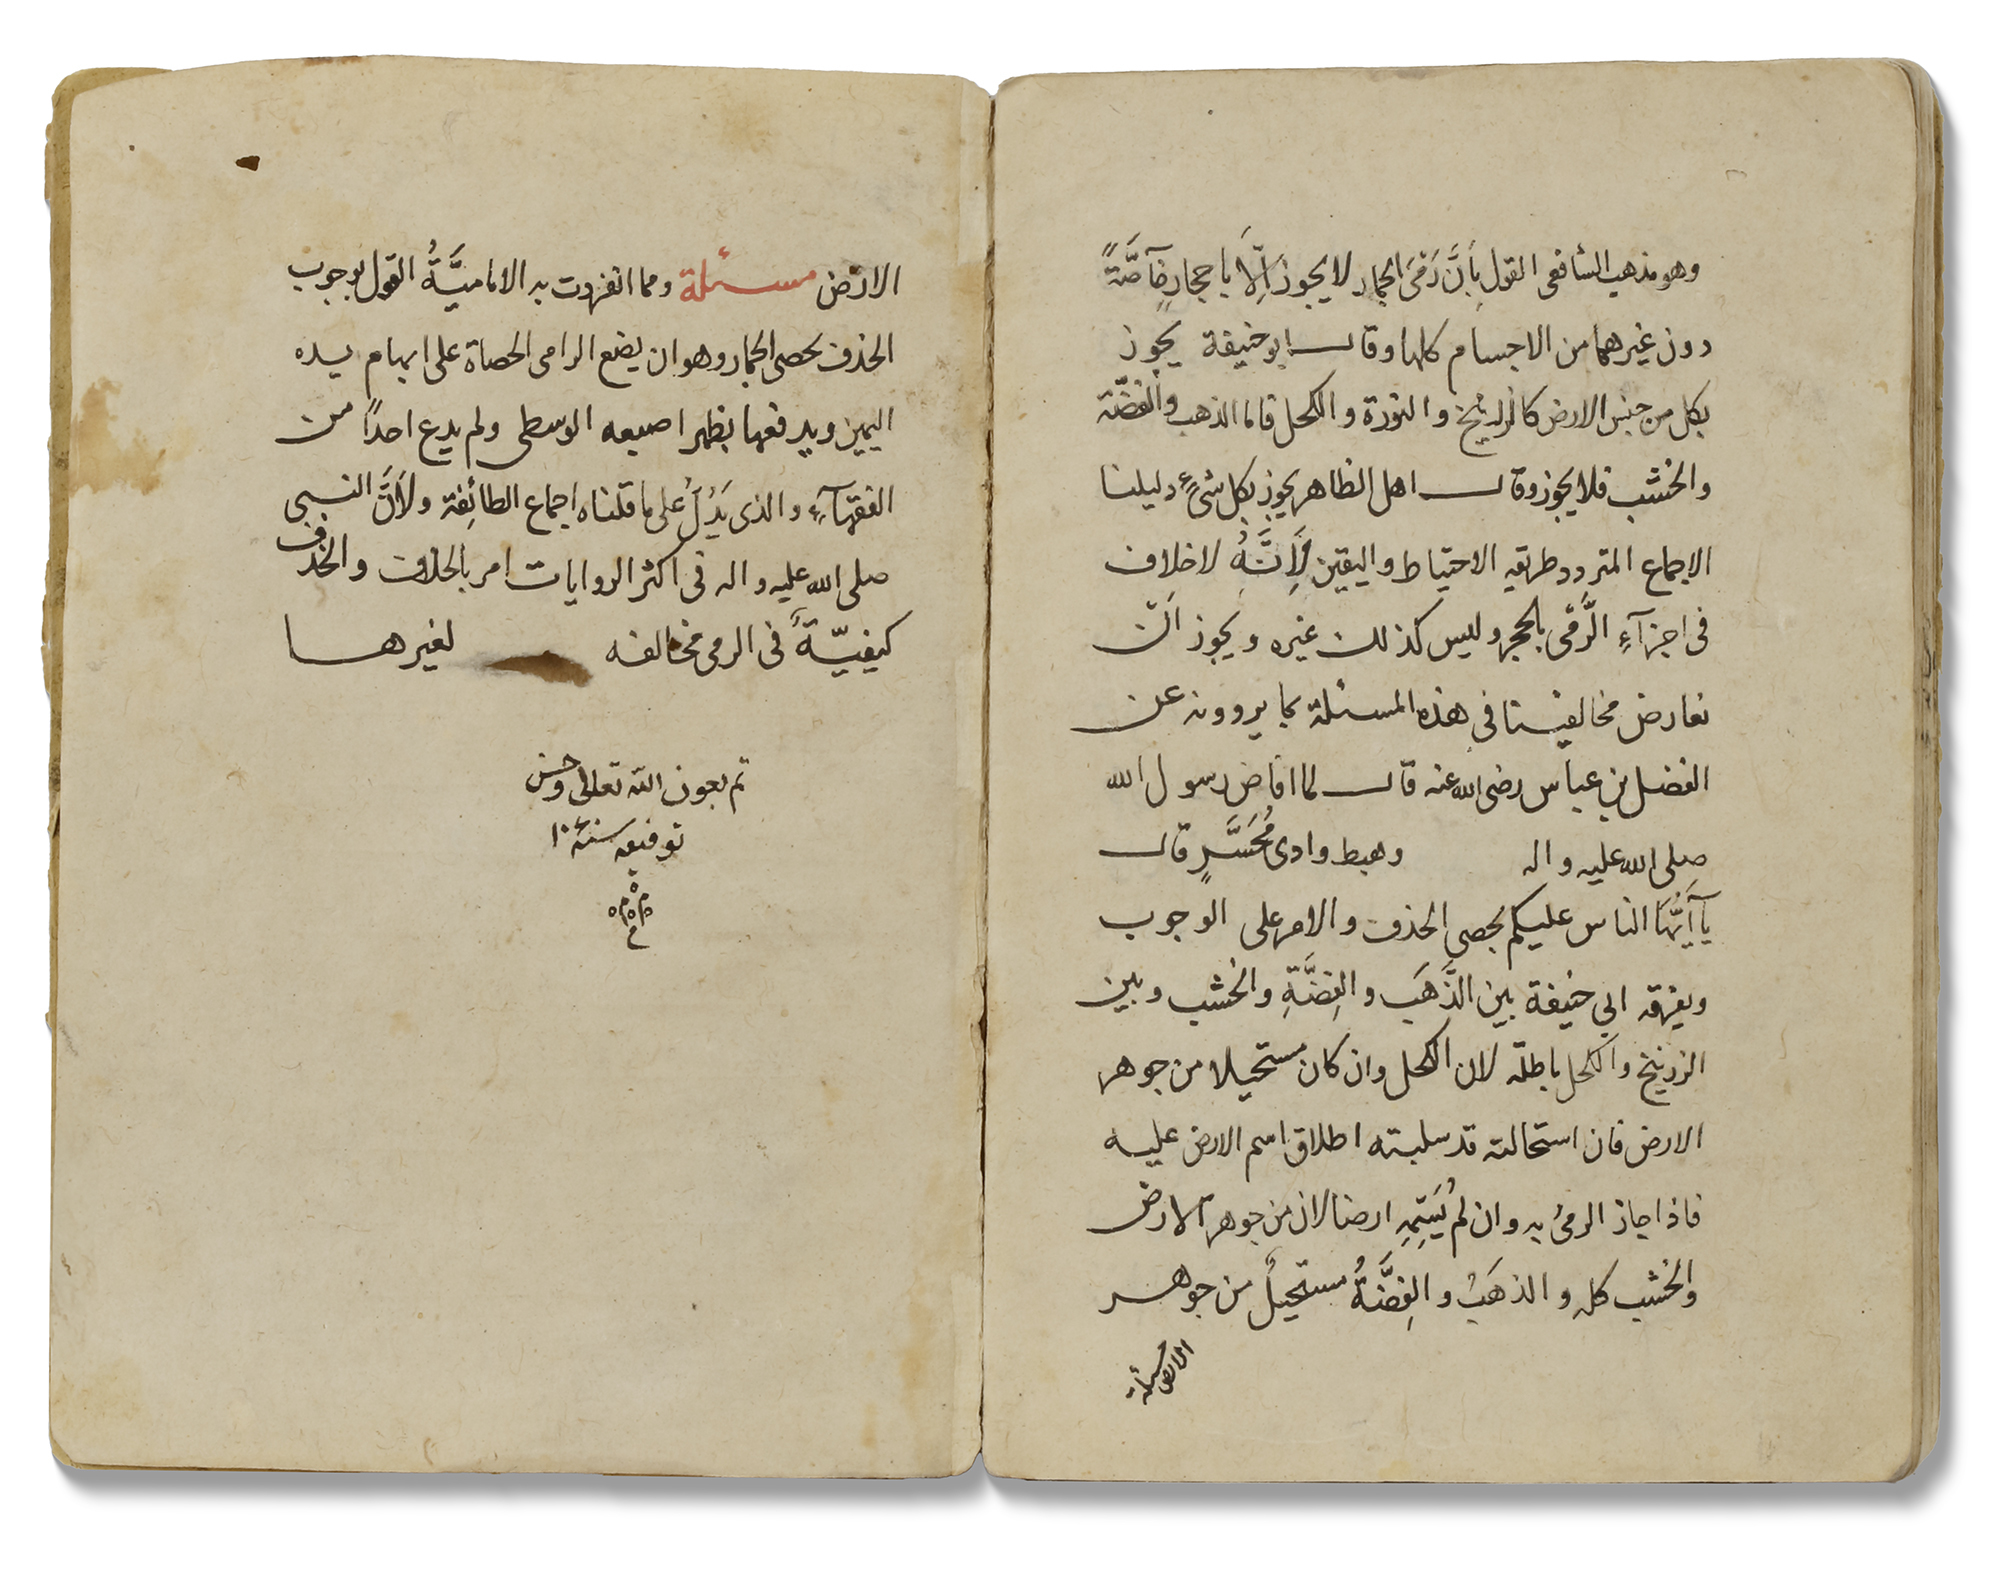 MIR ABUL FATAH IBN MIRZA MAKHDOOM AL-HUSAINI (D.974AH/ 1566AD), A TREATISE ON MATTERS CONCERNING THE - Image 6 of 8